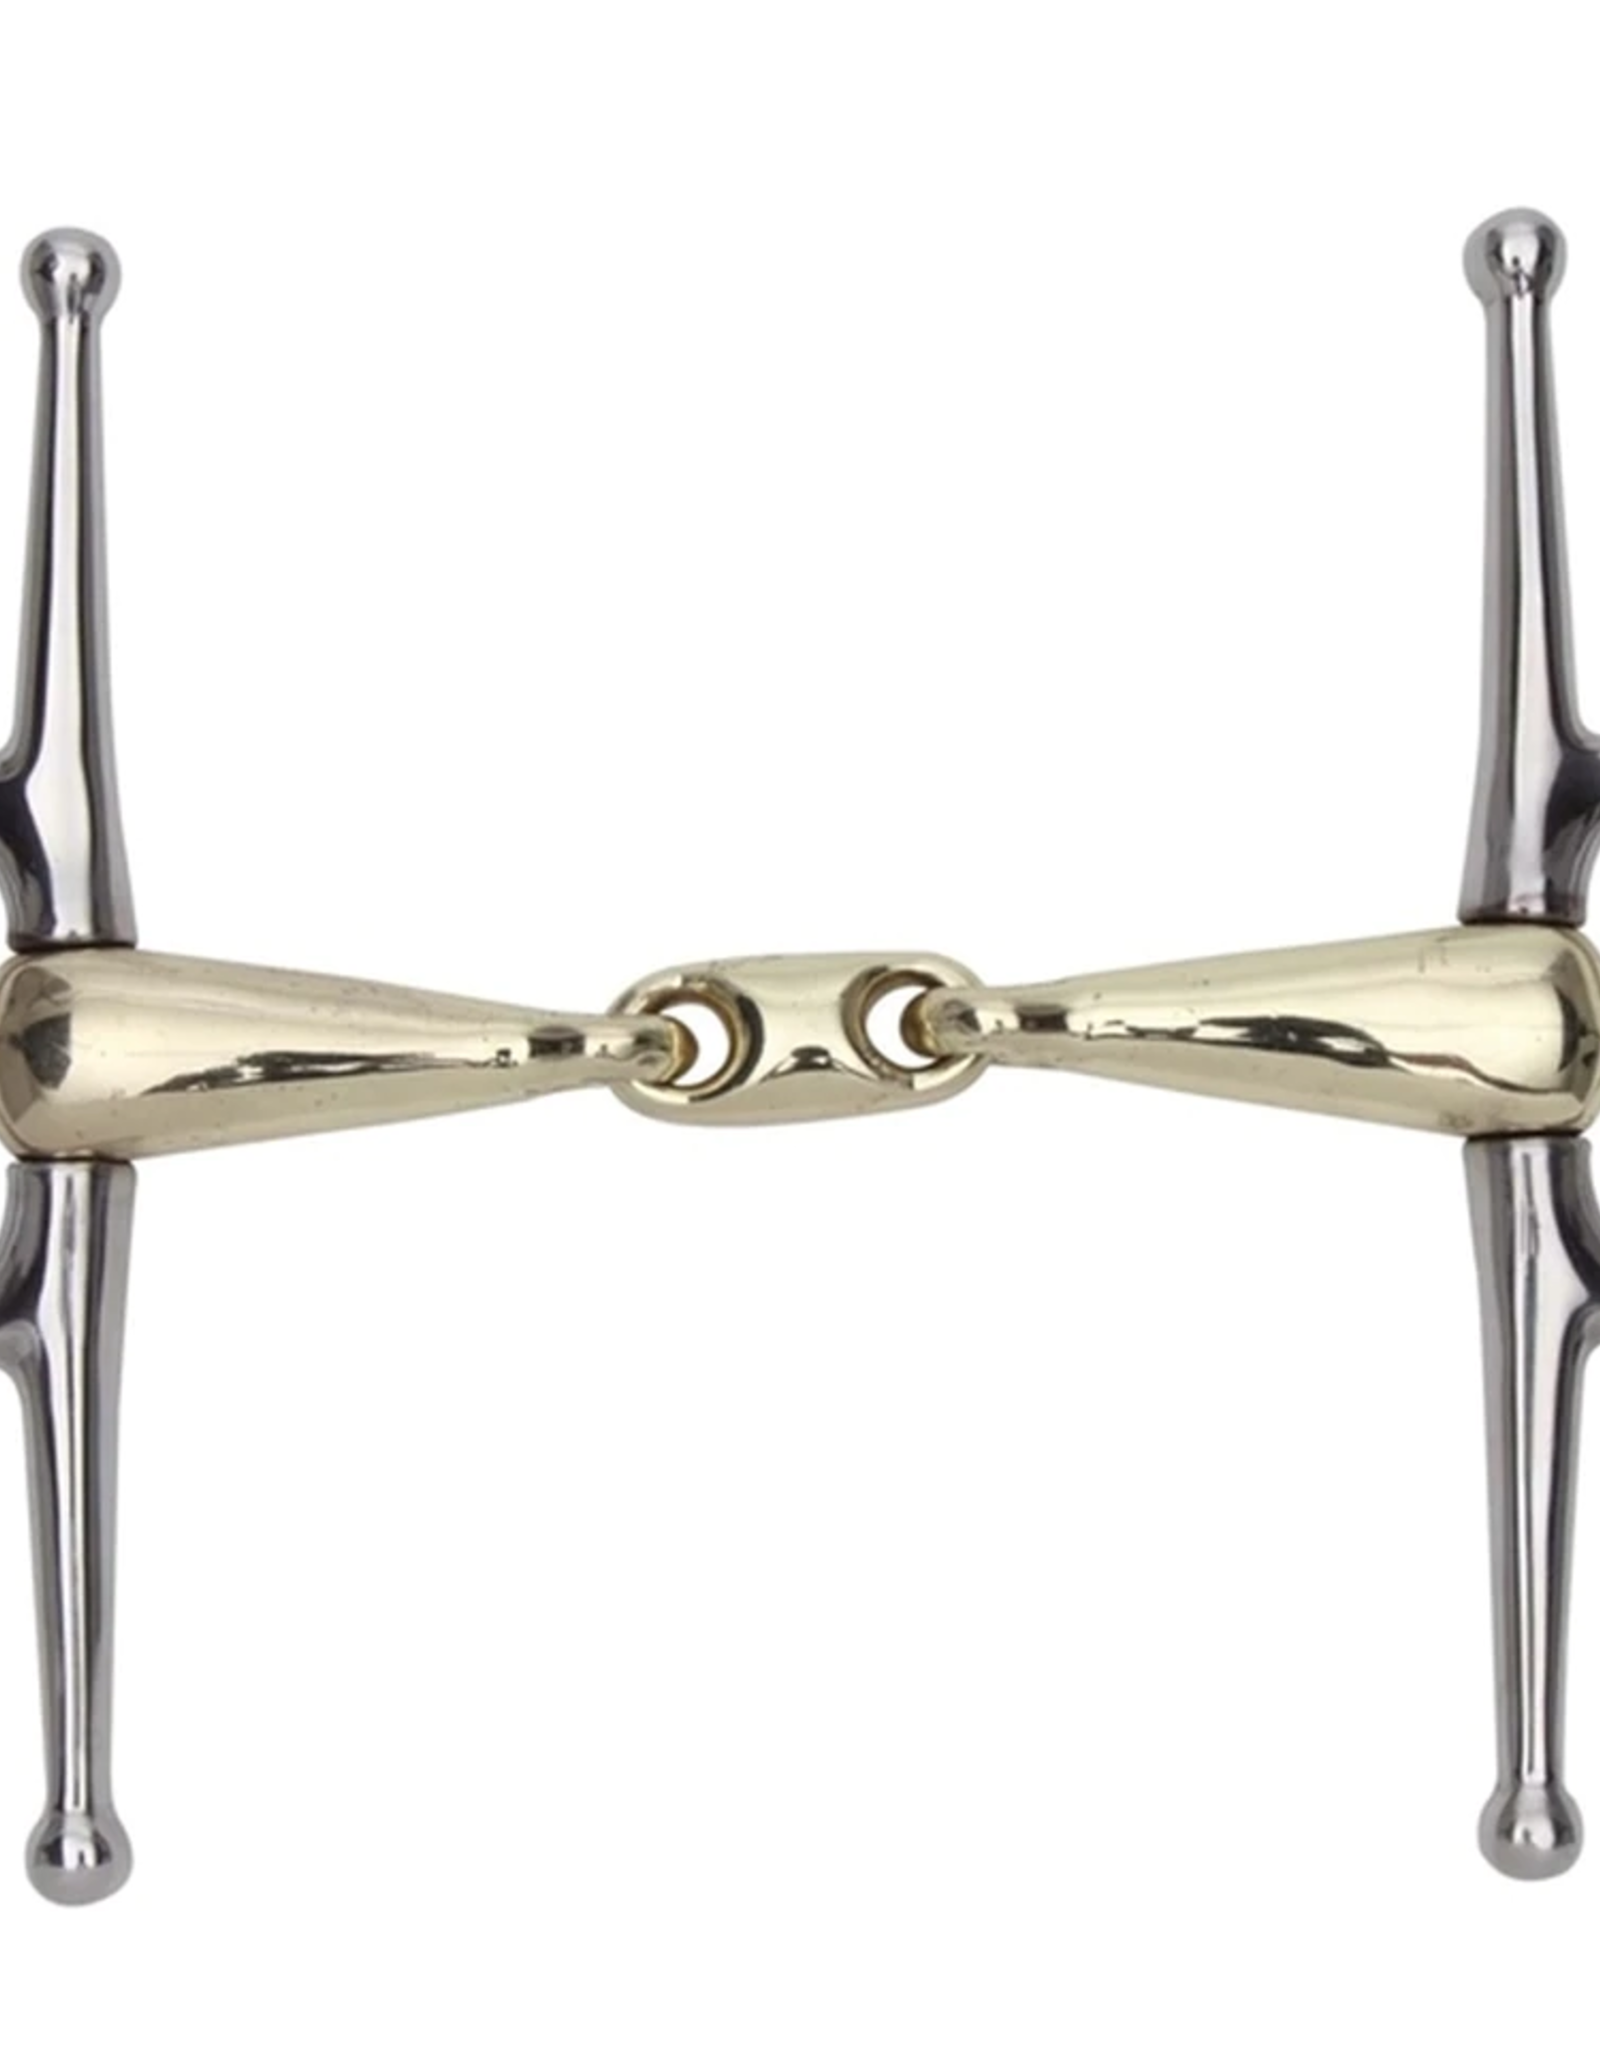 SHIRES BRASS ALLOY FULL CHEEK SNAFFLE WITH LOZENGE